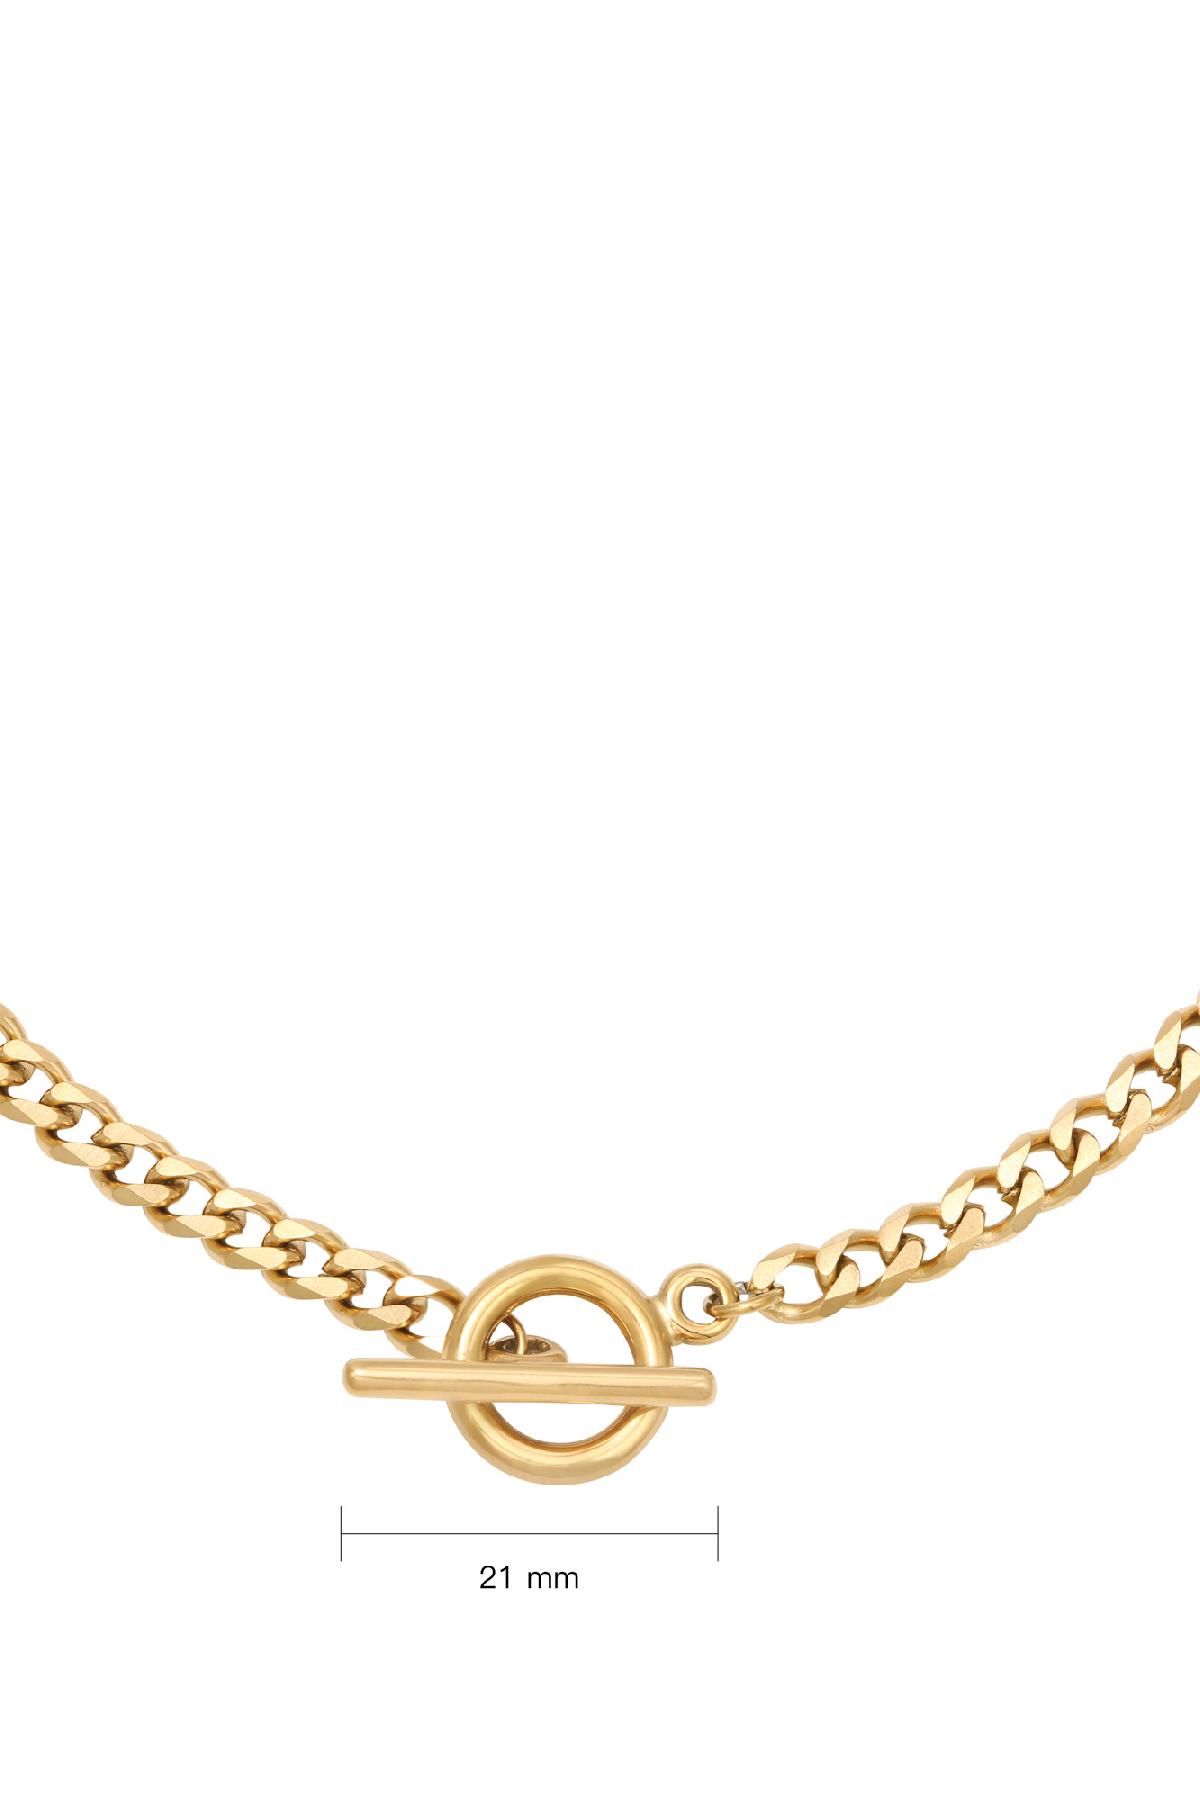 Necklace Chain Sanya Gold Stainless Steel h5 Picture4